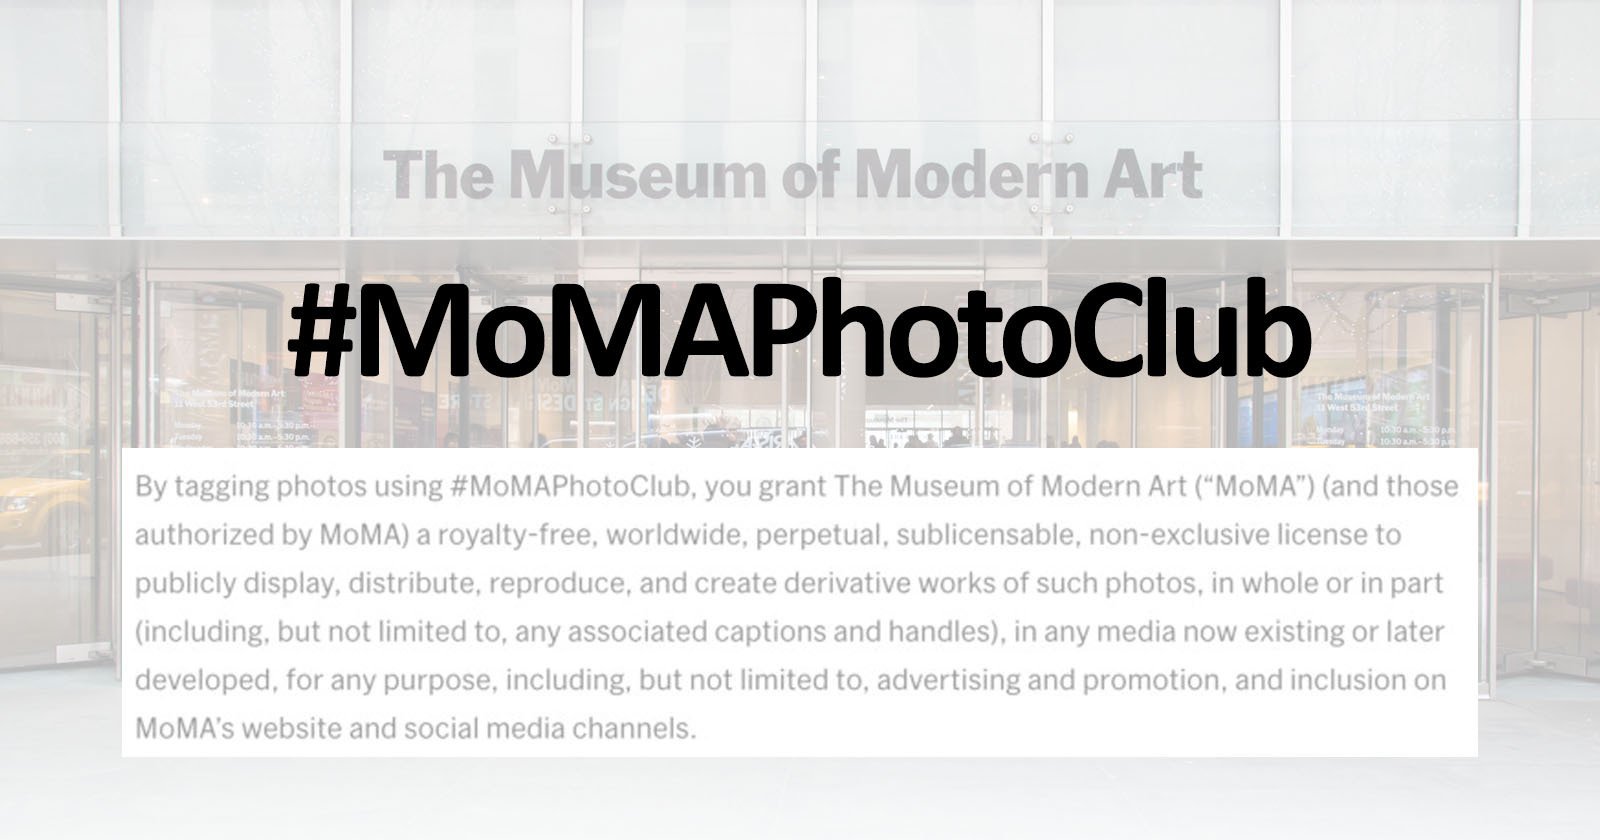 Stedord Betjening mulig Sada MoMA Wants Your Photos for Free, Perpetually, and 'Any Purpose' | PetaPixel